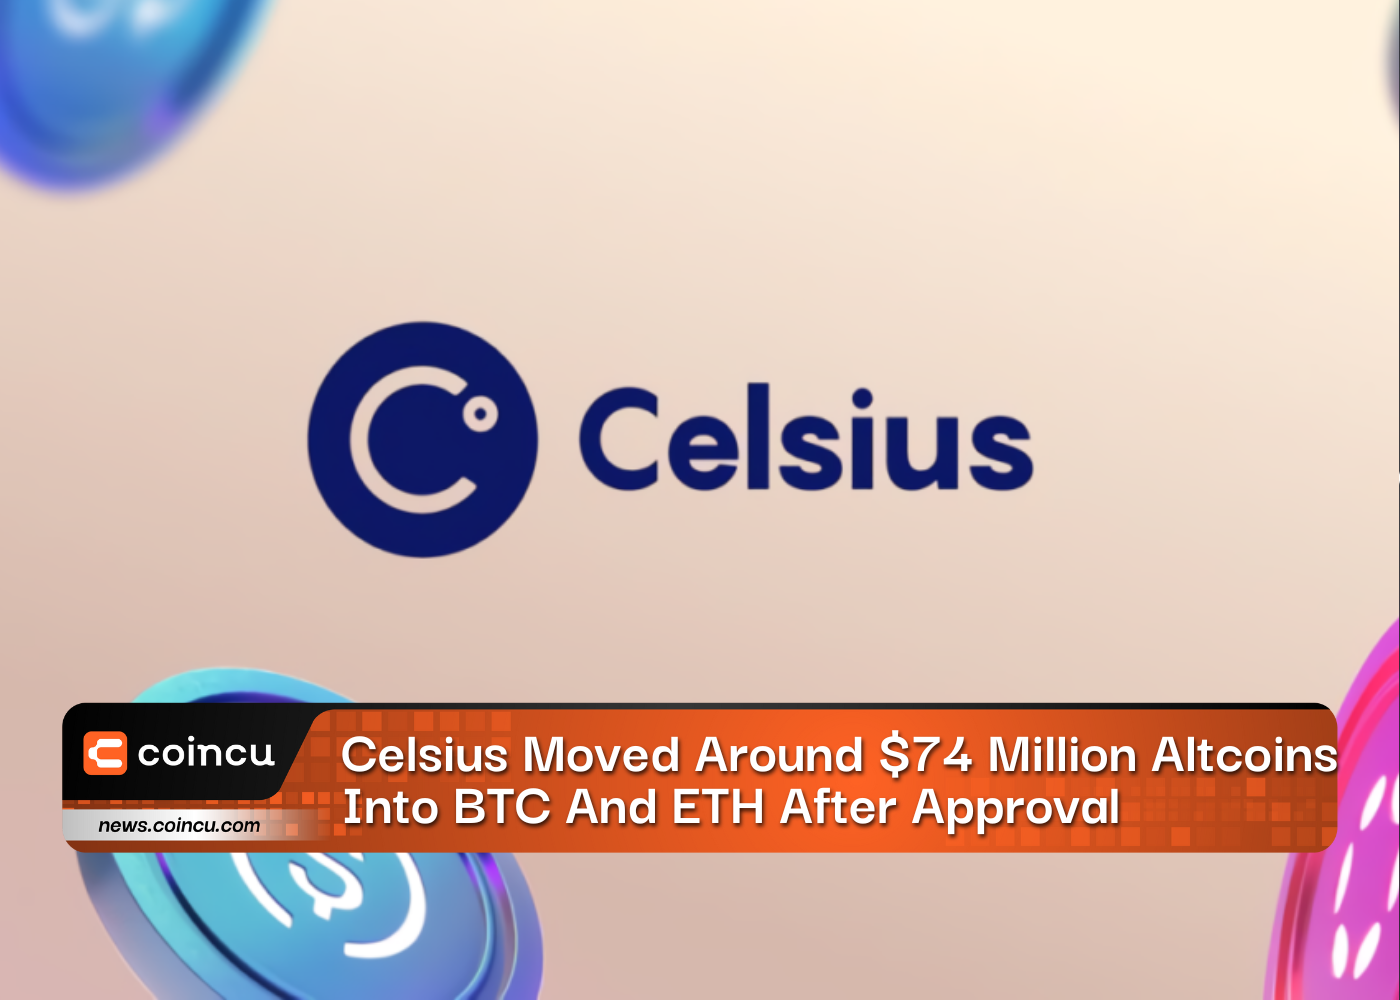 Celsius Moved Around $74 Million Altcoins Into BTC And ETH After Approval